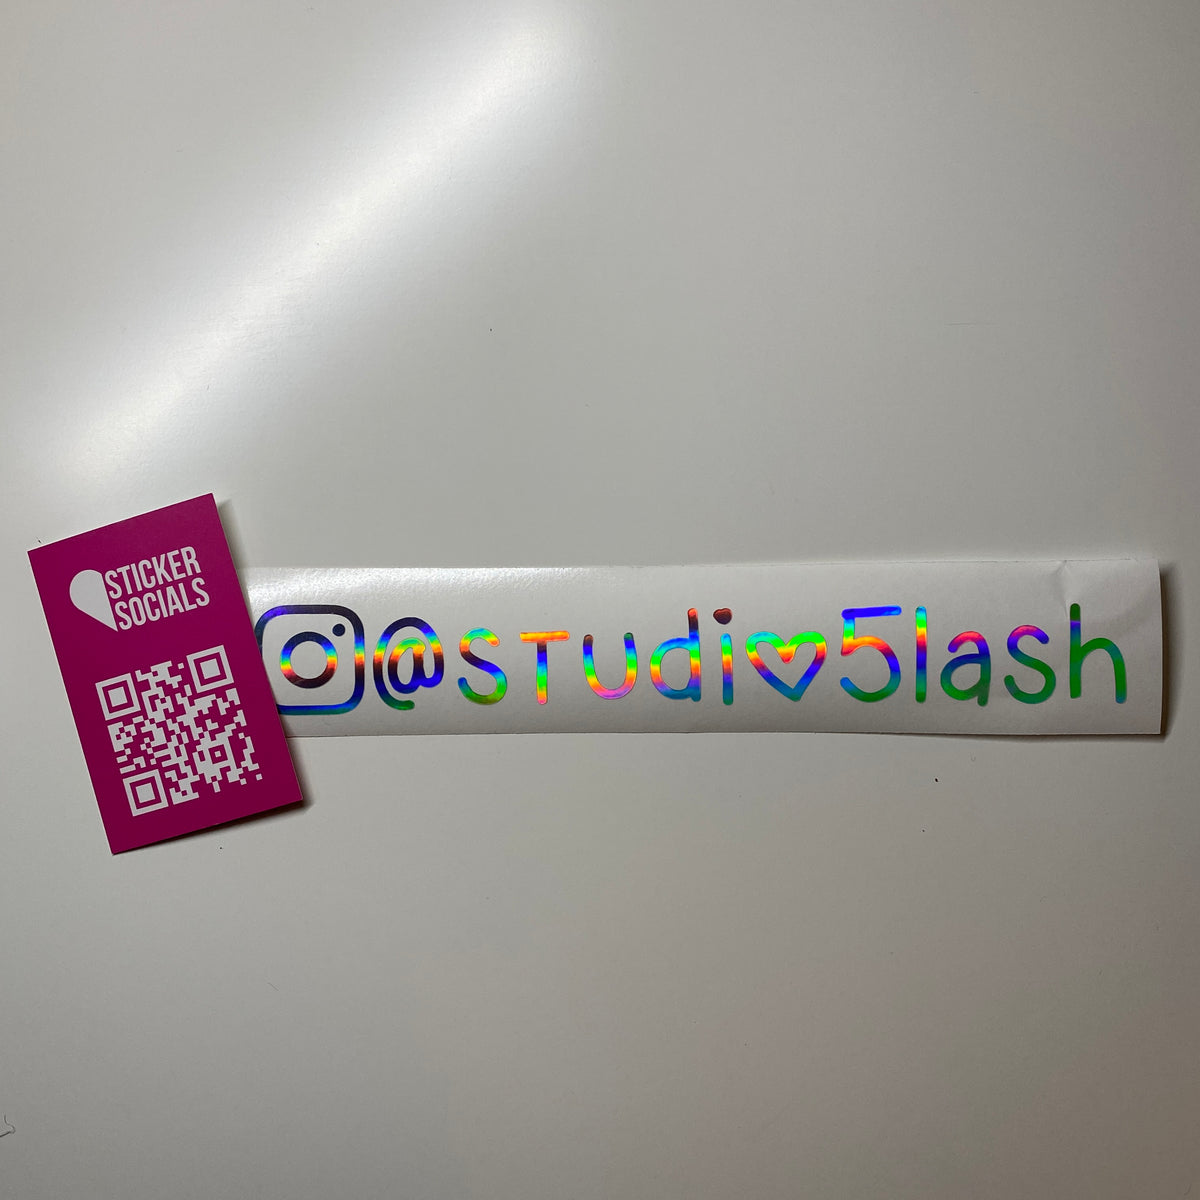 Personalised Social Media Holographic Decal Sticker